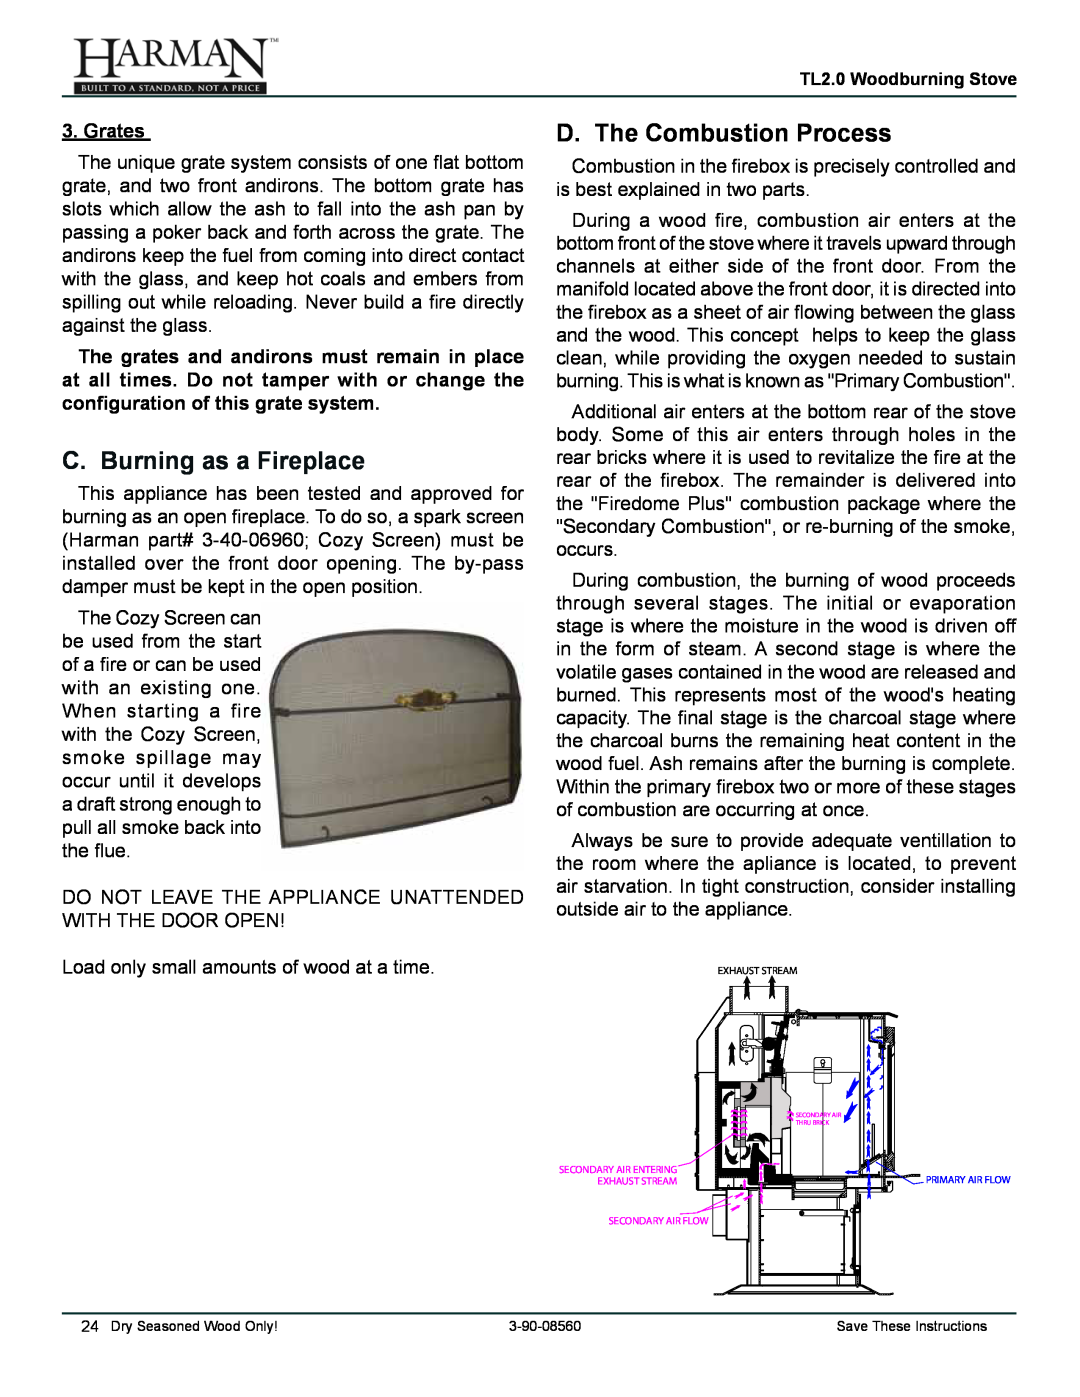 Harman Stove Company TL2.0 manual C. Burning as a Fireplace, D. The Combustion Process, Grates 